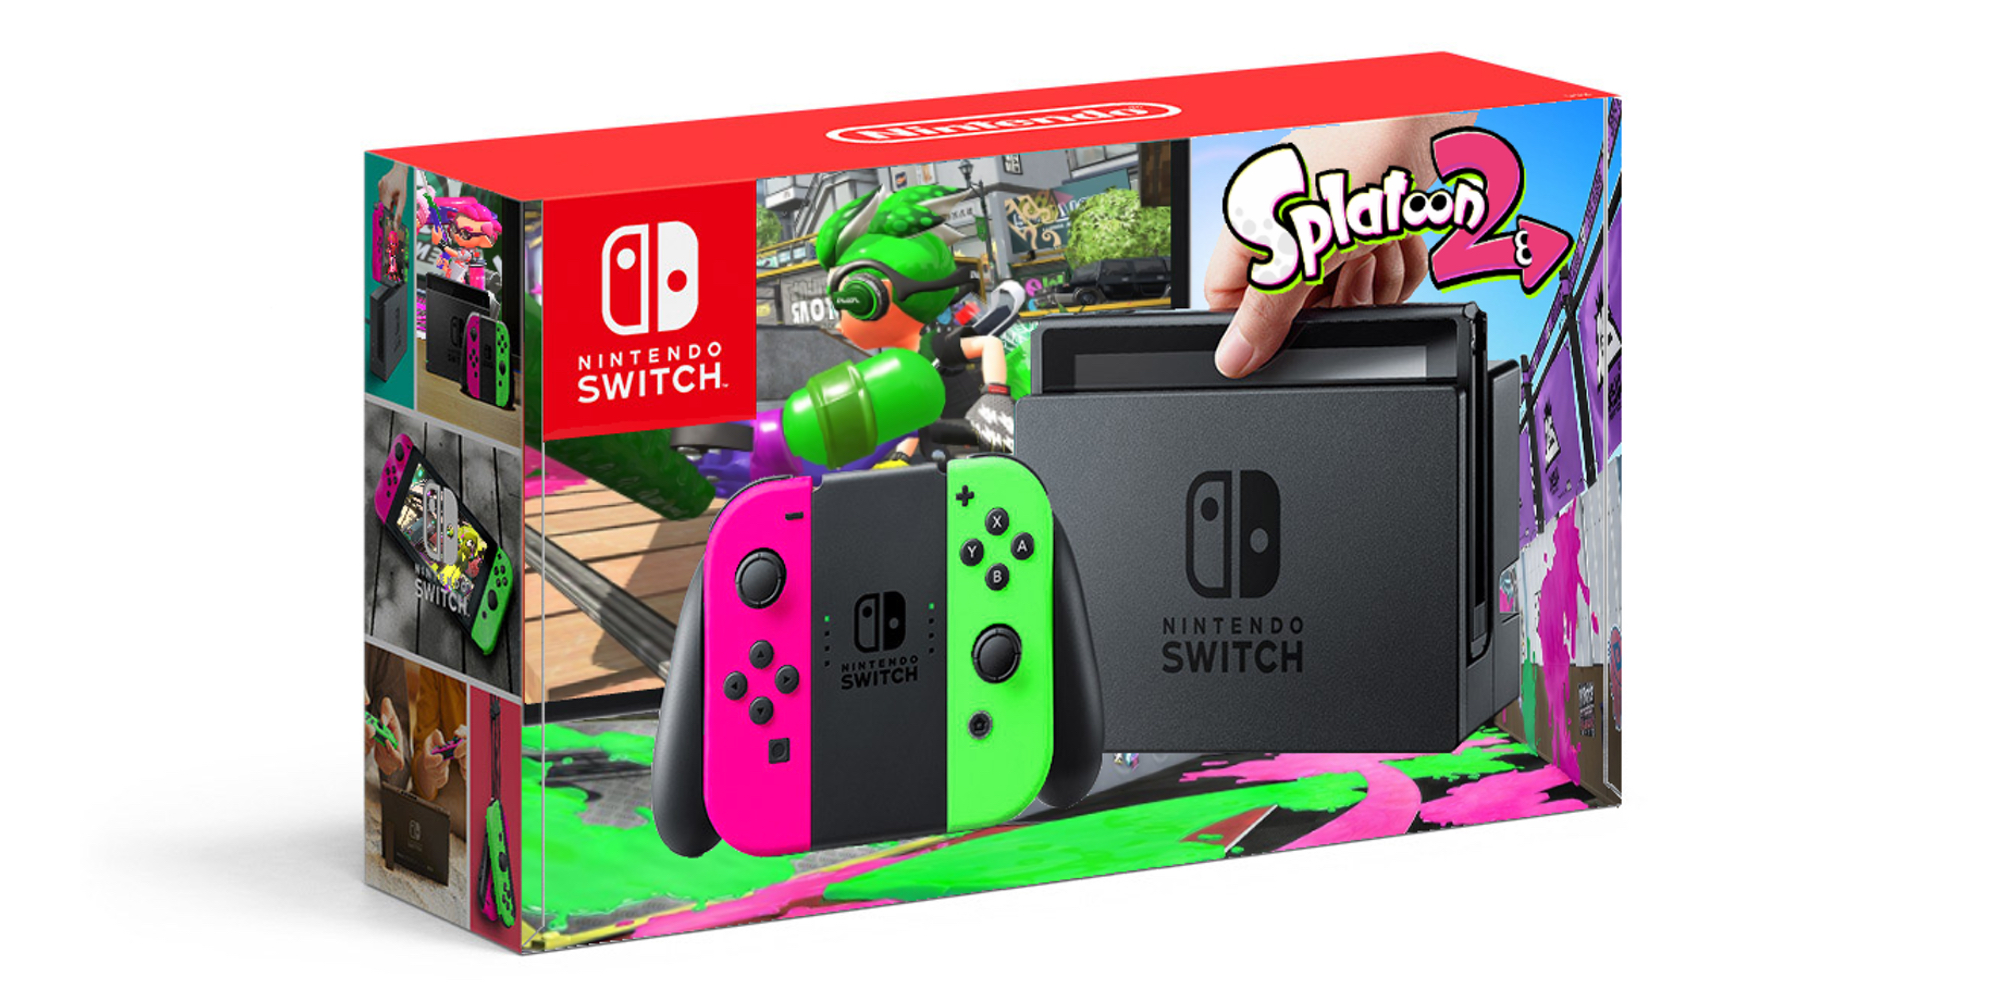 nintendo-s-splatoon-2-bundle-makes-a-comeback-with-90-day-switch-online